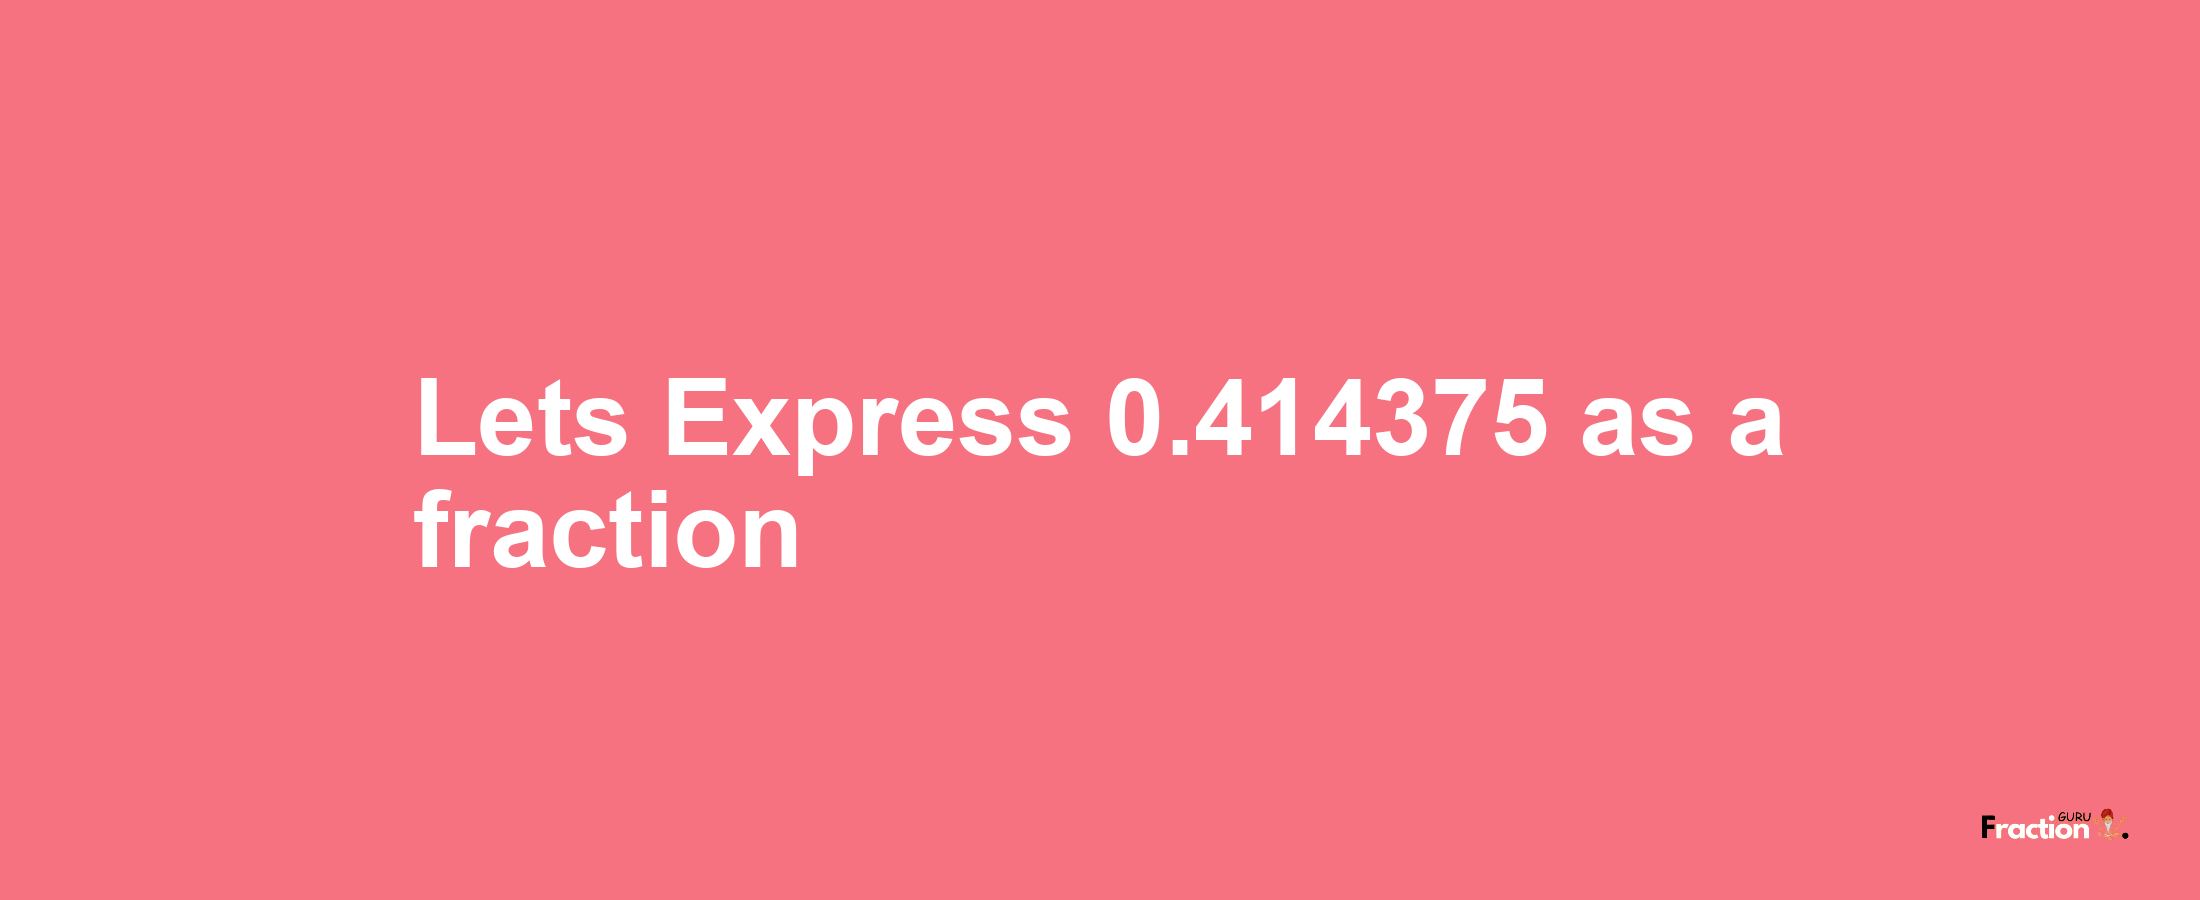 Lets Express 0.414375 as afraction